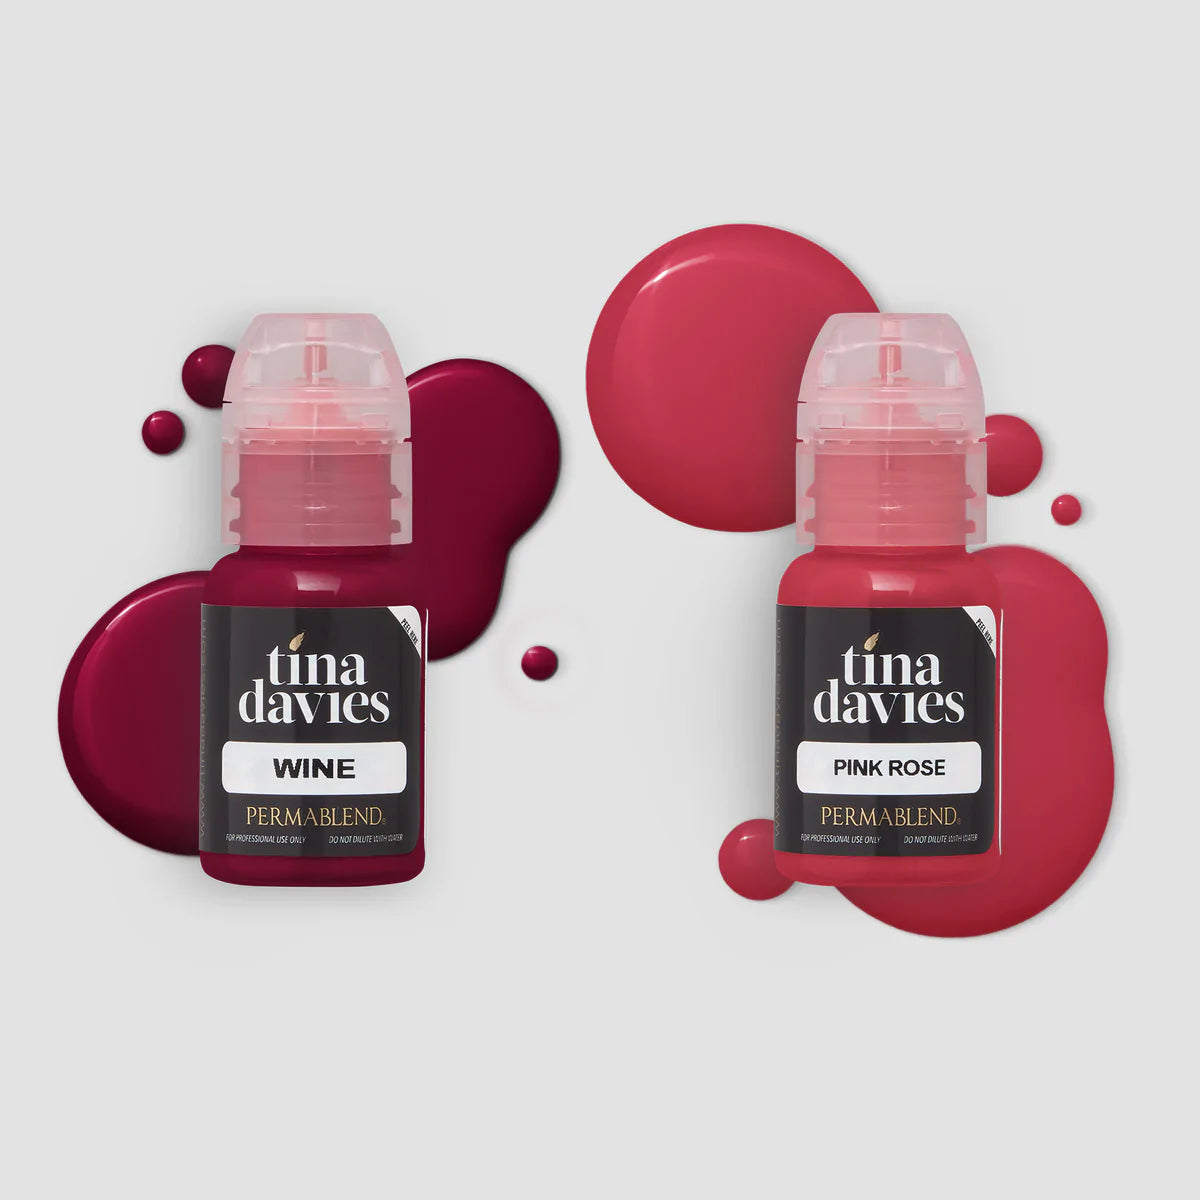 Two tina davies lip pigments side by side in clear bottles so you can see the vibrant pigment colour through them. Pigment also spilt in drops behind bottle for effect.